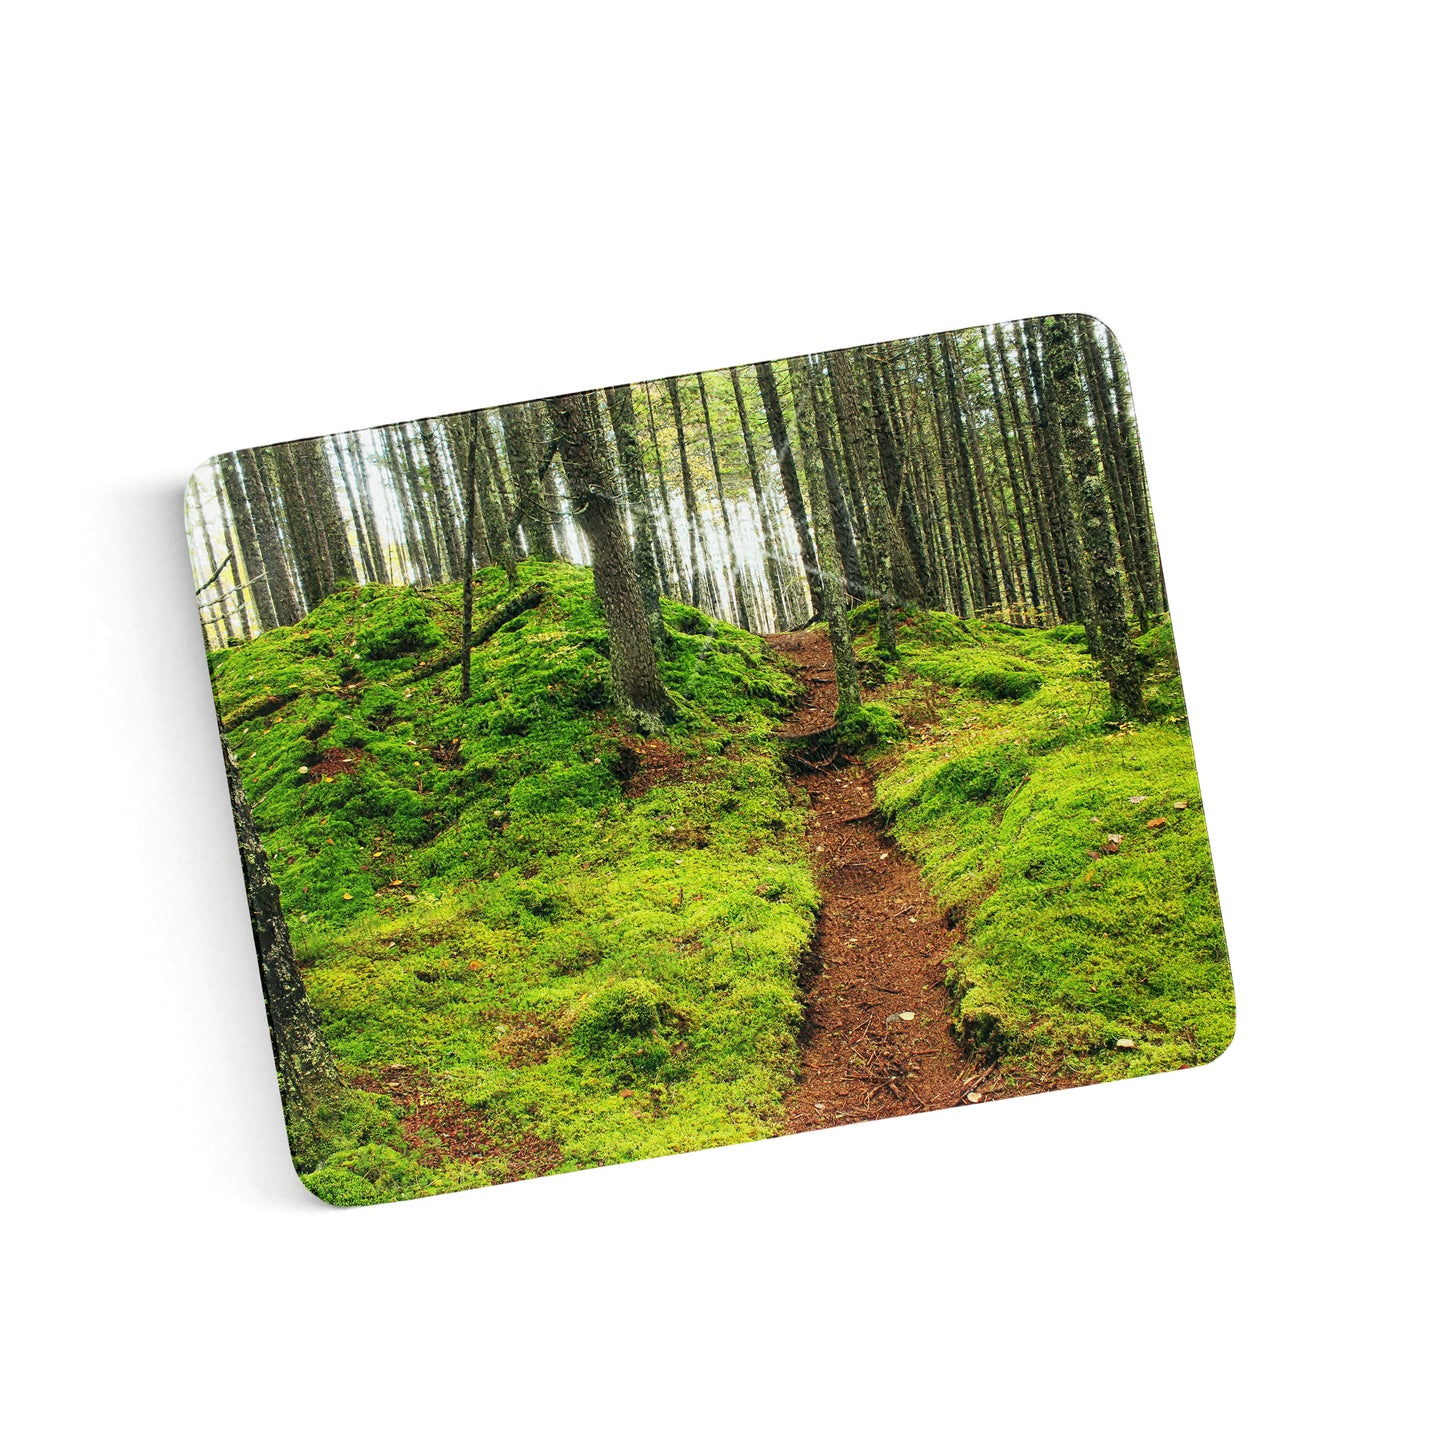 Pittsburg Fairytale Forest Cutting Board by Chris Whiton